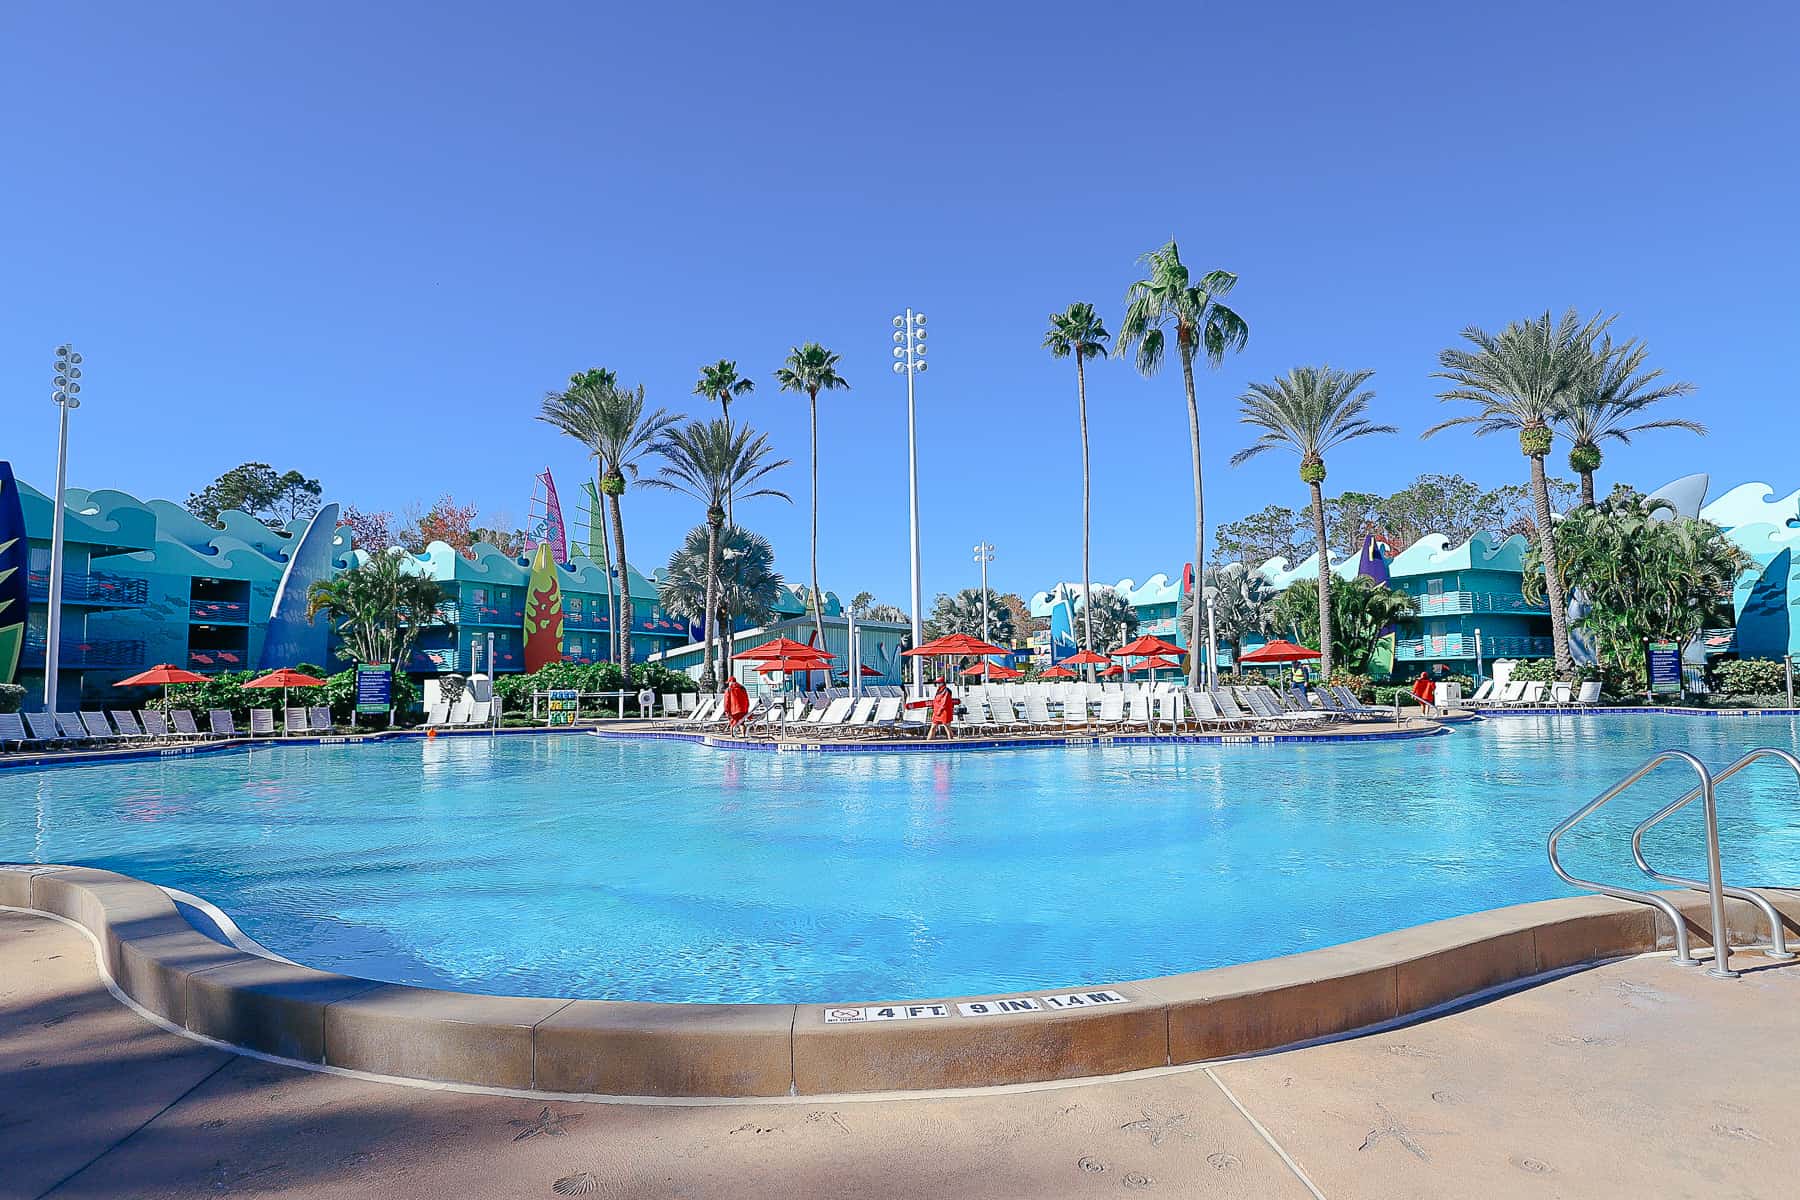 The Pool at Disney's All-Star Sports.